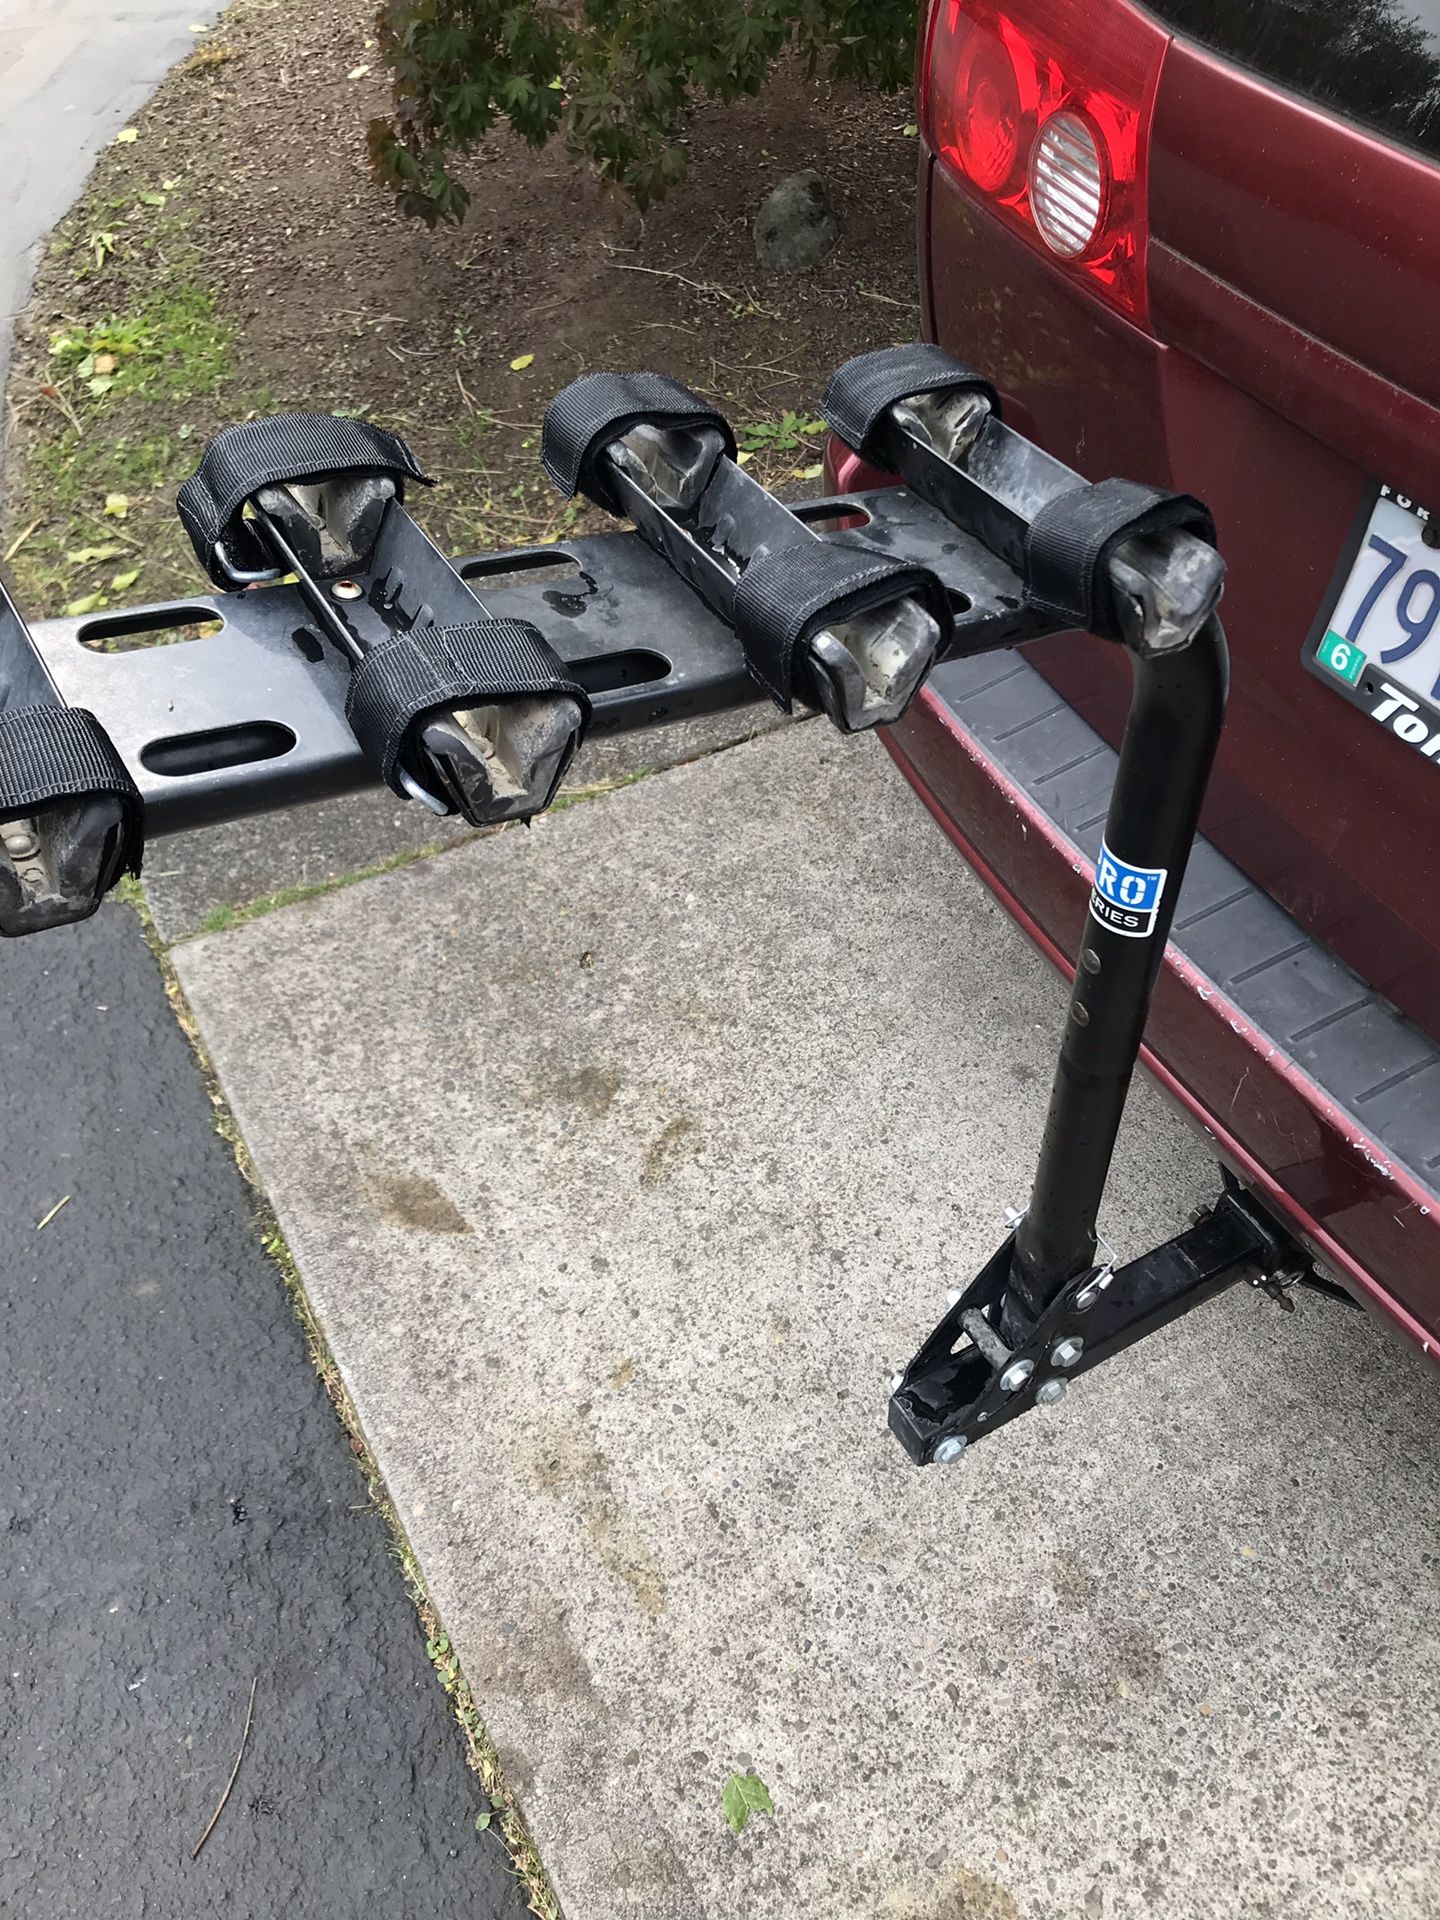 Pro Series Hitch Mount Bike Rack (Carrier) for 4 Bikes